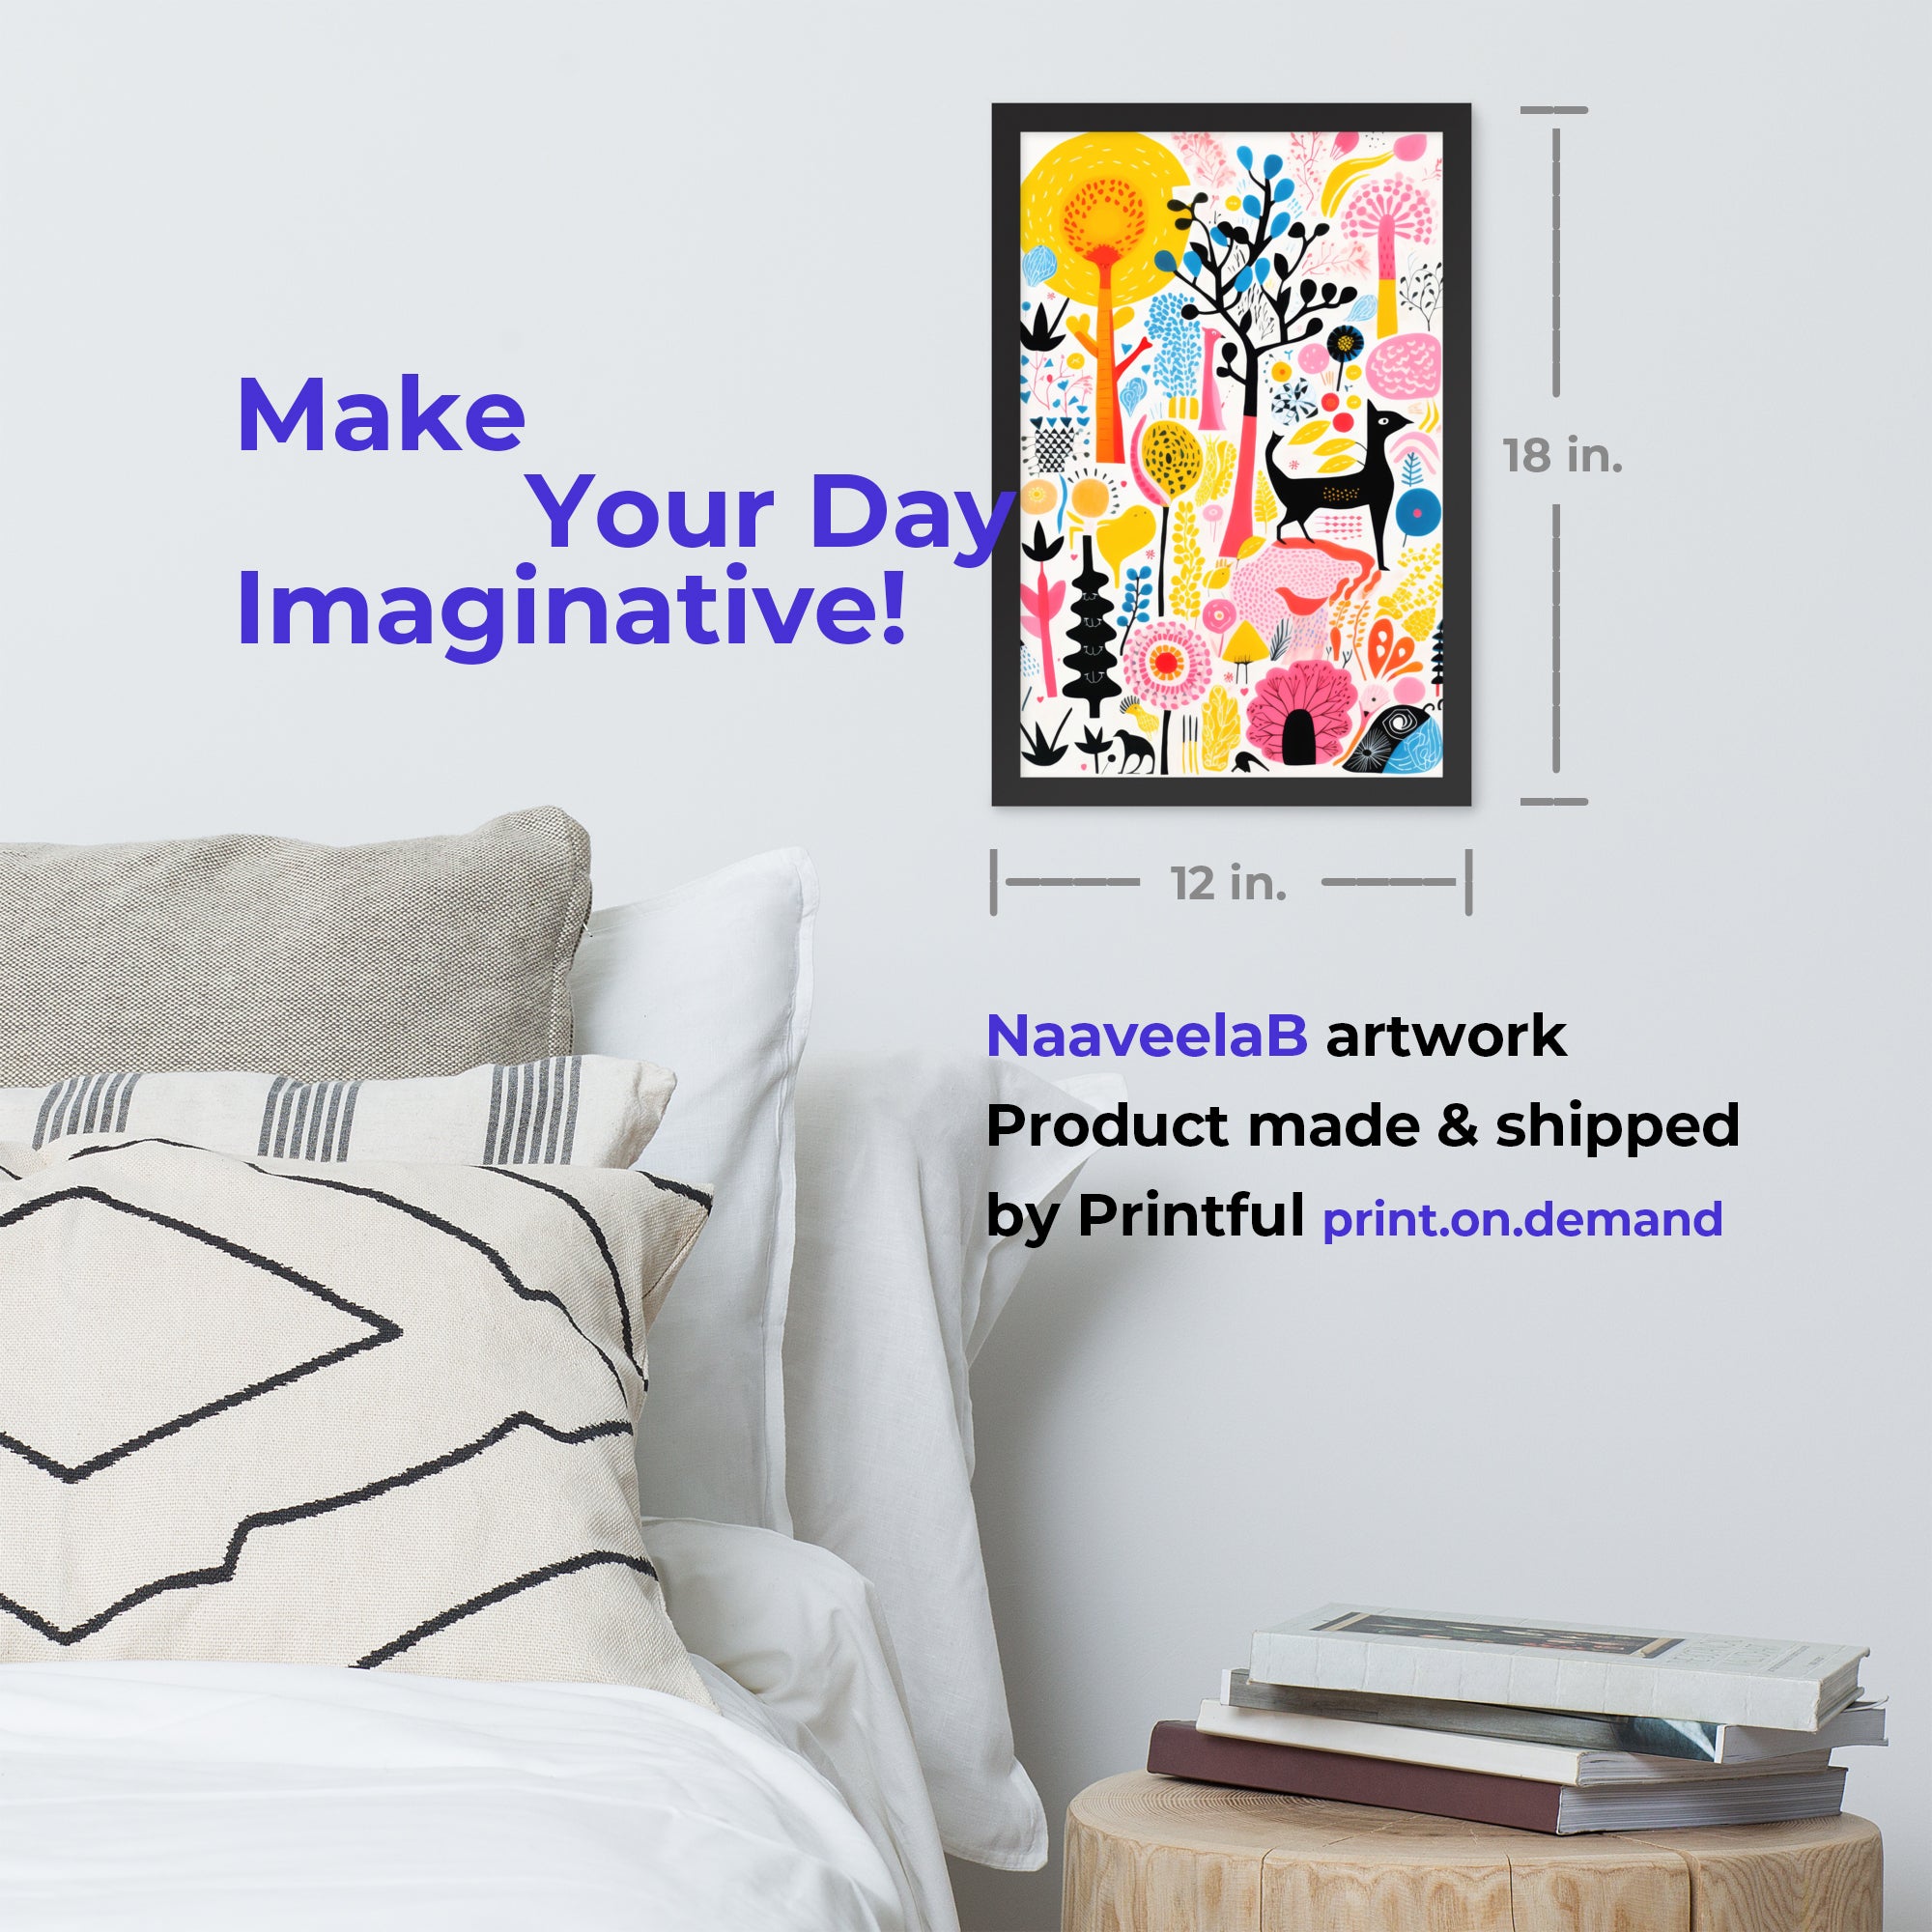 colorful wall art room decor by Instagram AI artist